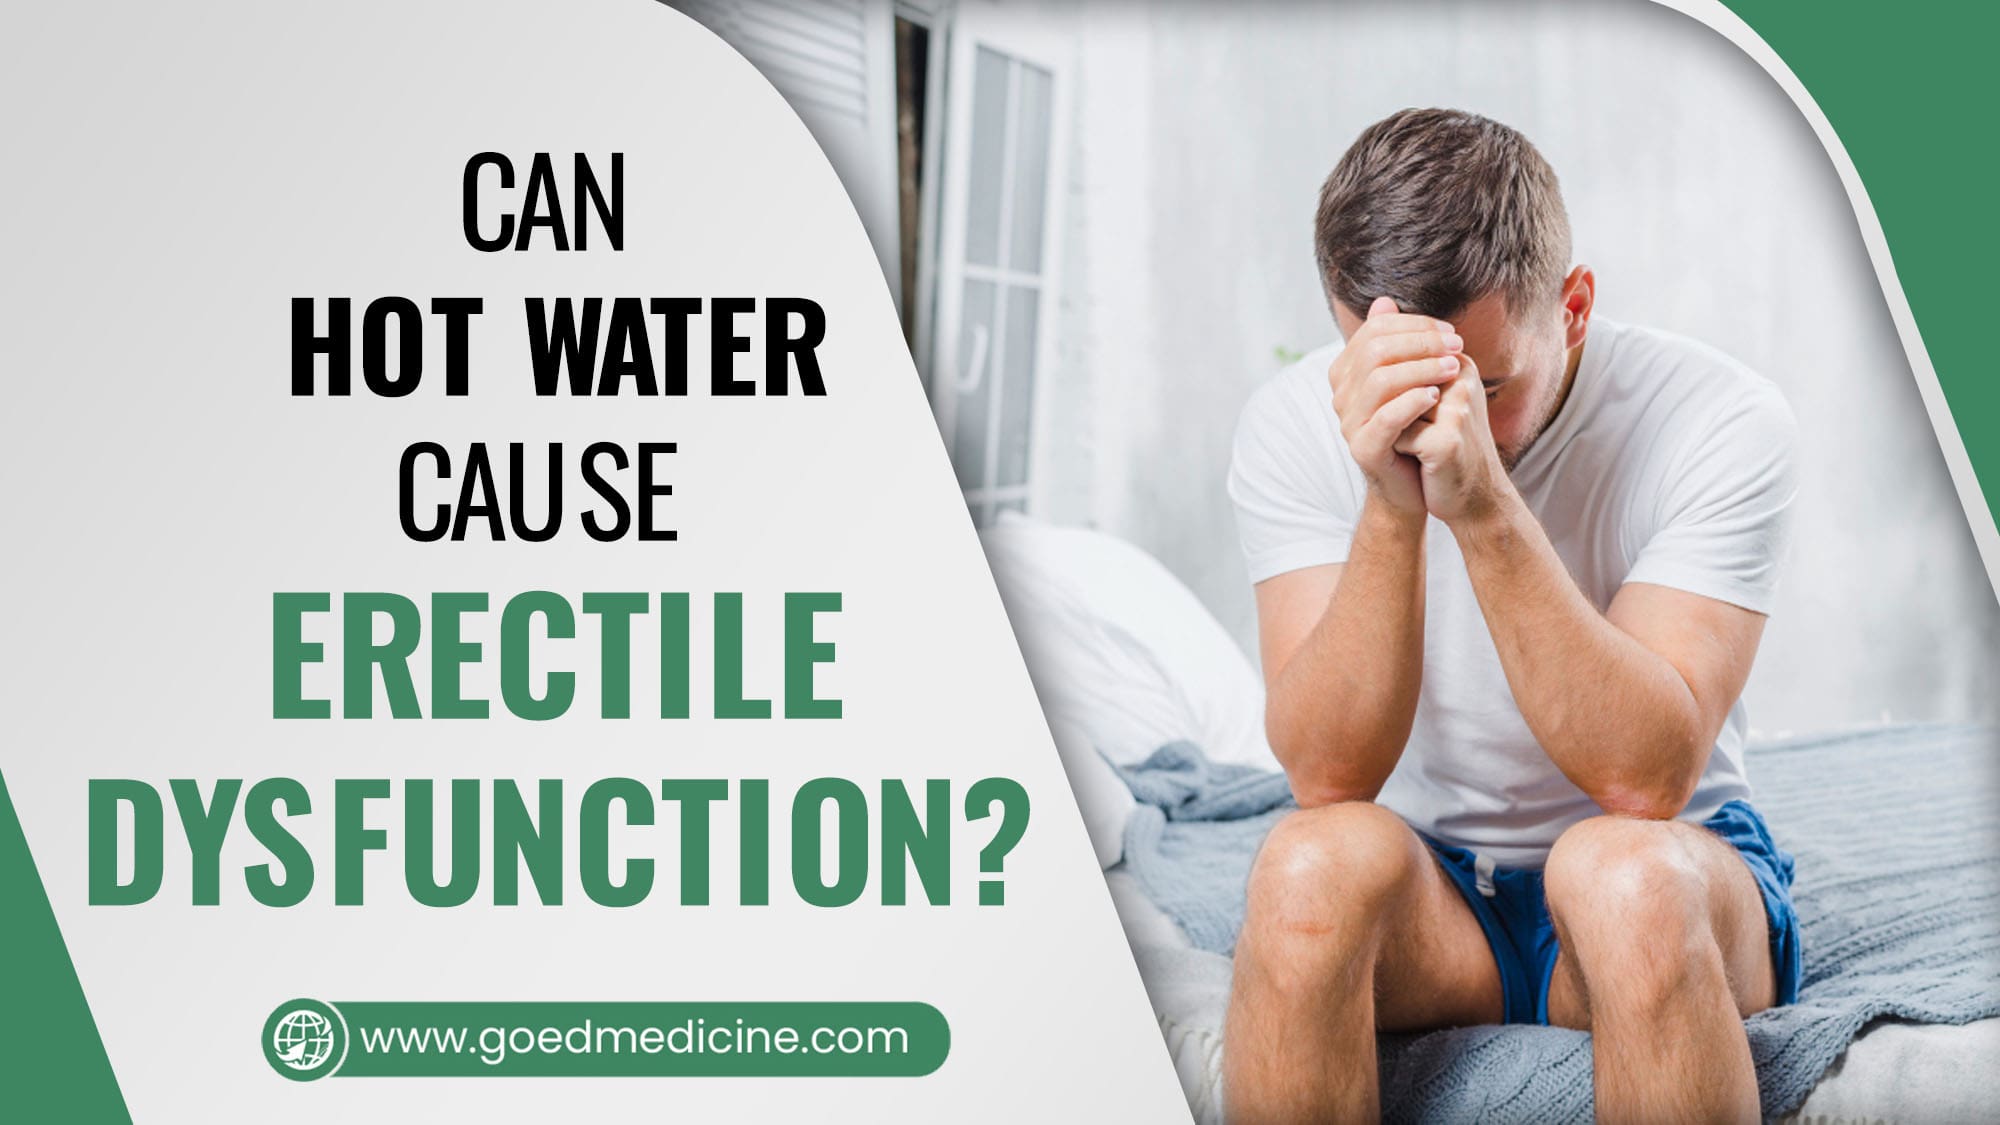 Can Hot Water Cause Erectile Dysfunction?